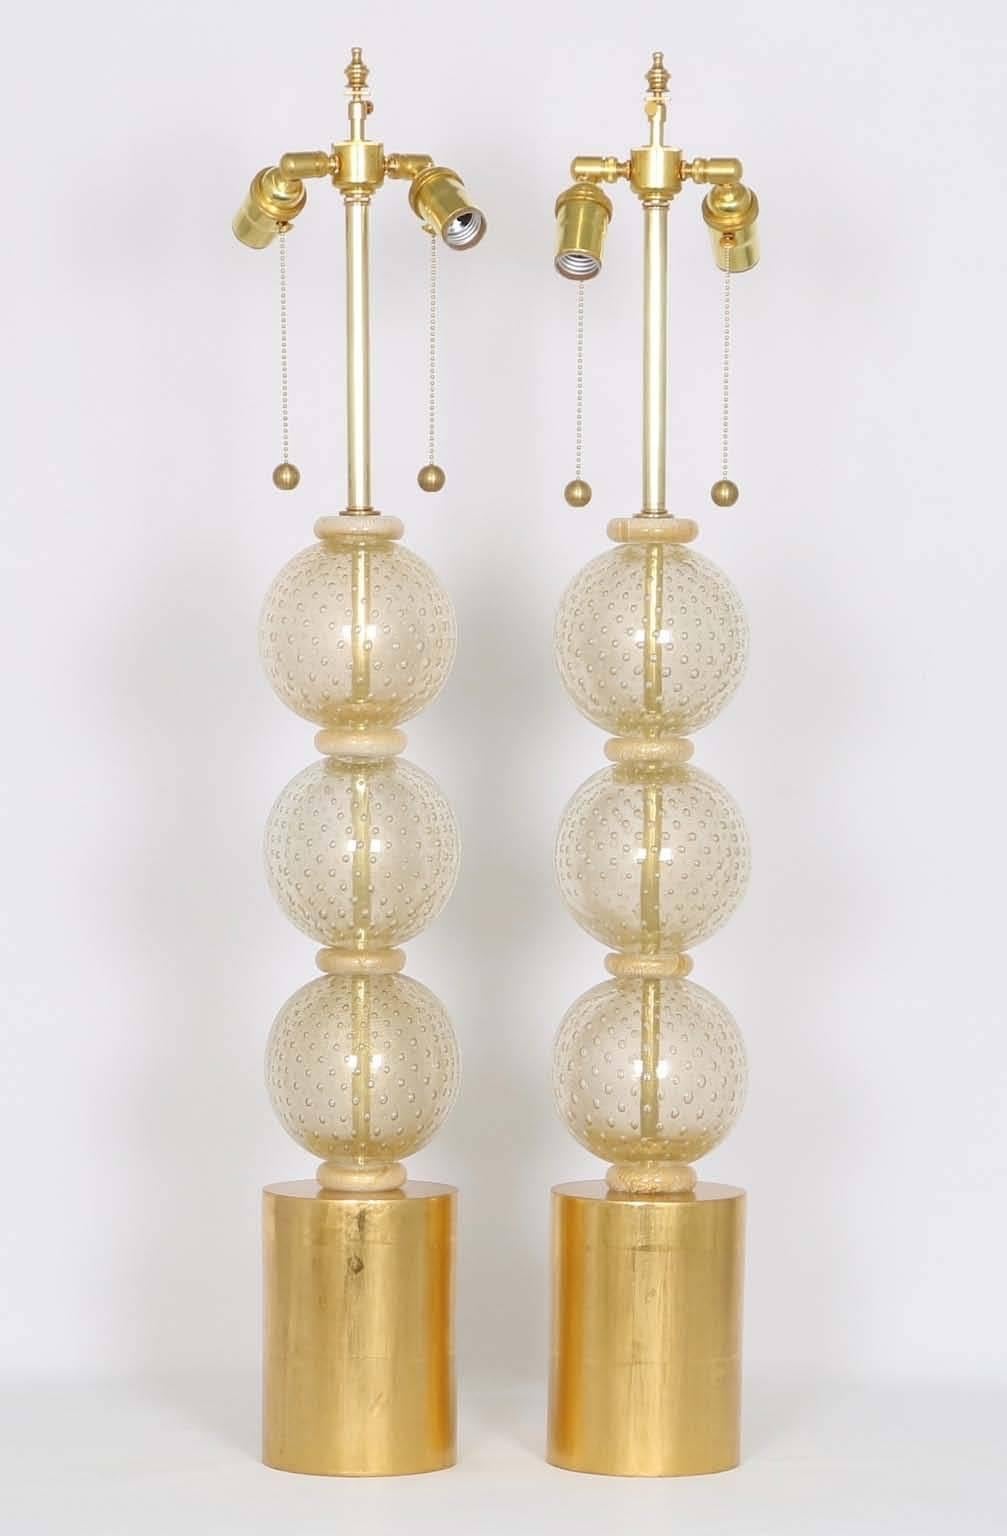 A pair of Hollywood Regency style Murano glass stacked ball table lamps by Barbini, produced in Italy, circa 1950s, with controlled bubbles (bullicante), mounted on gilded wood bases. The noted height is to the finial, height to the top of the glass